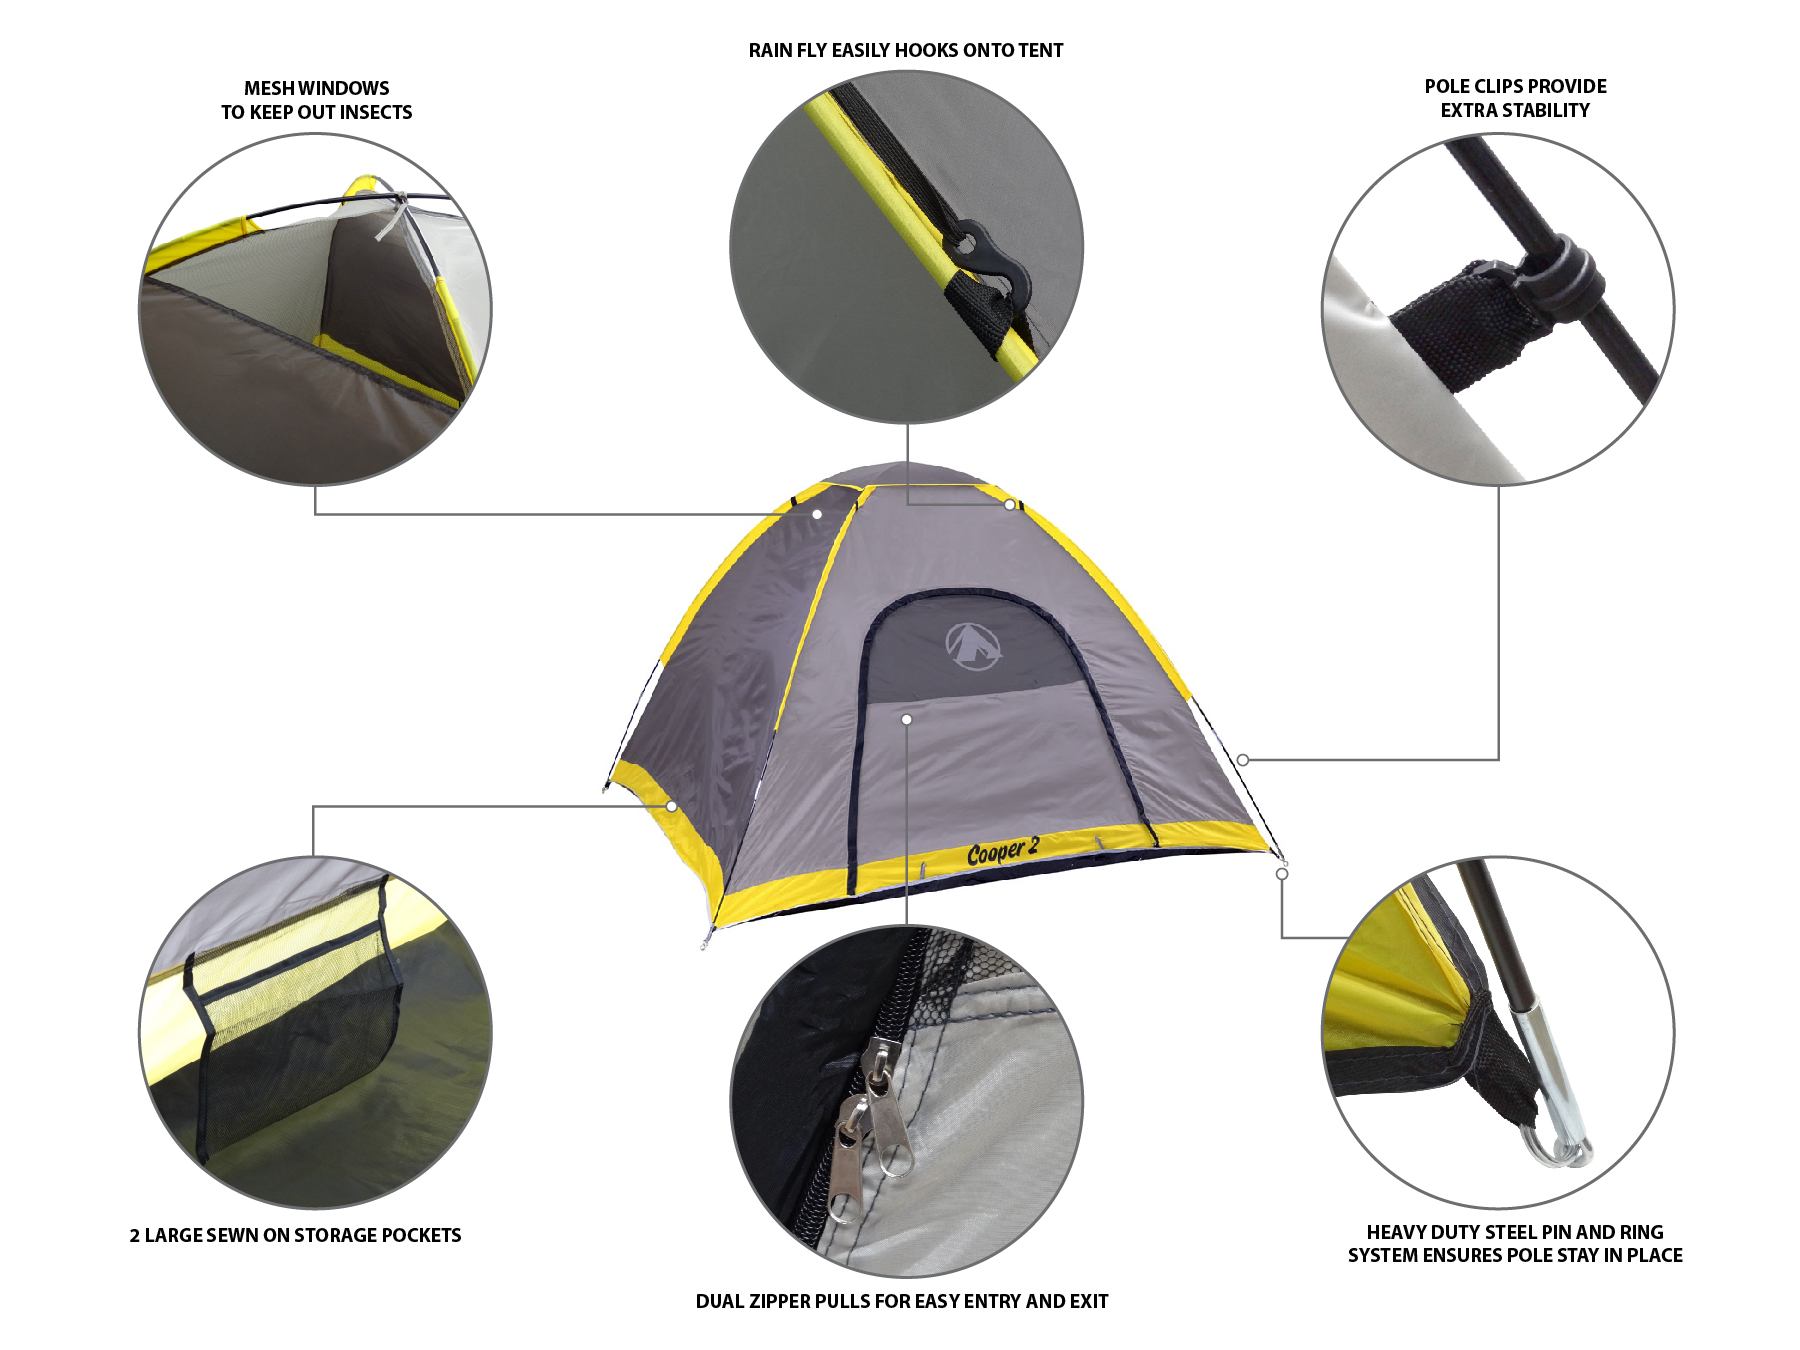 GigaTent 4-Person Dome Tent - image 2 of 5